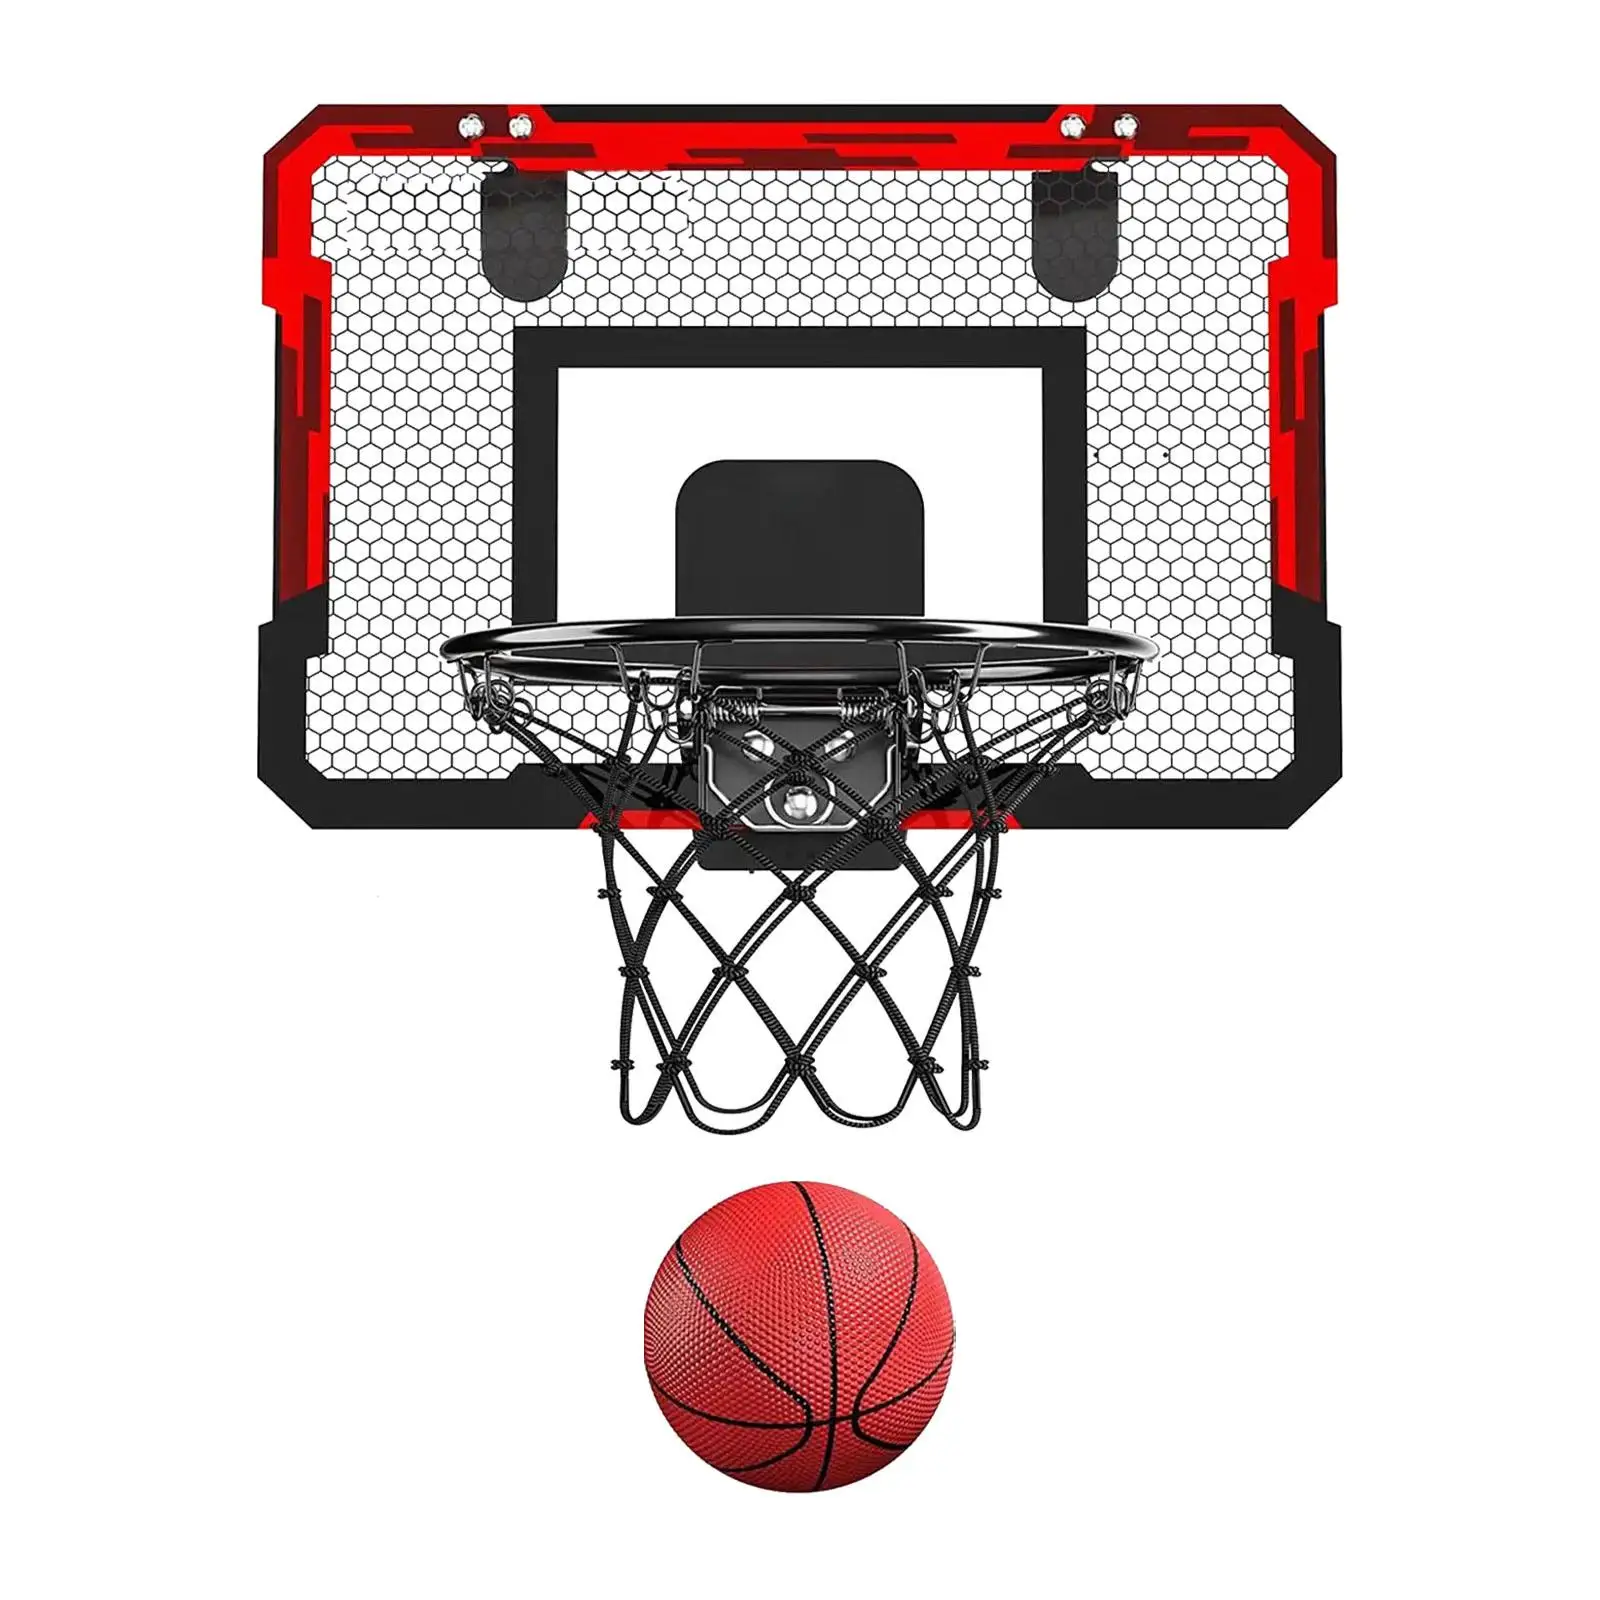 Basketball Hoop Basketball Toys with Pump Attachment Basketball System Door Room Basketball Hoop for Outdoor Indoor Boys Kids